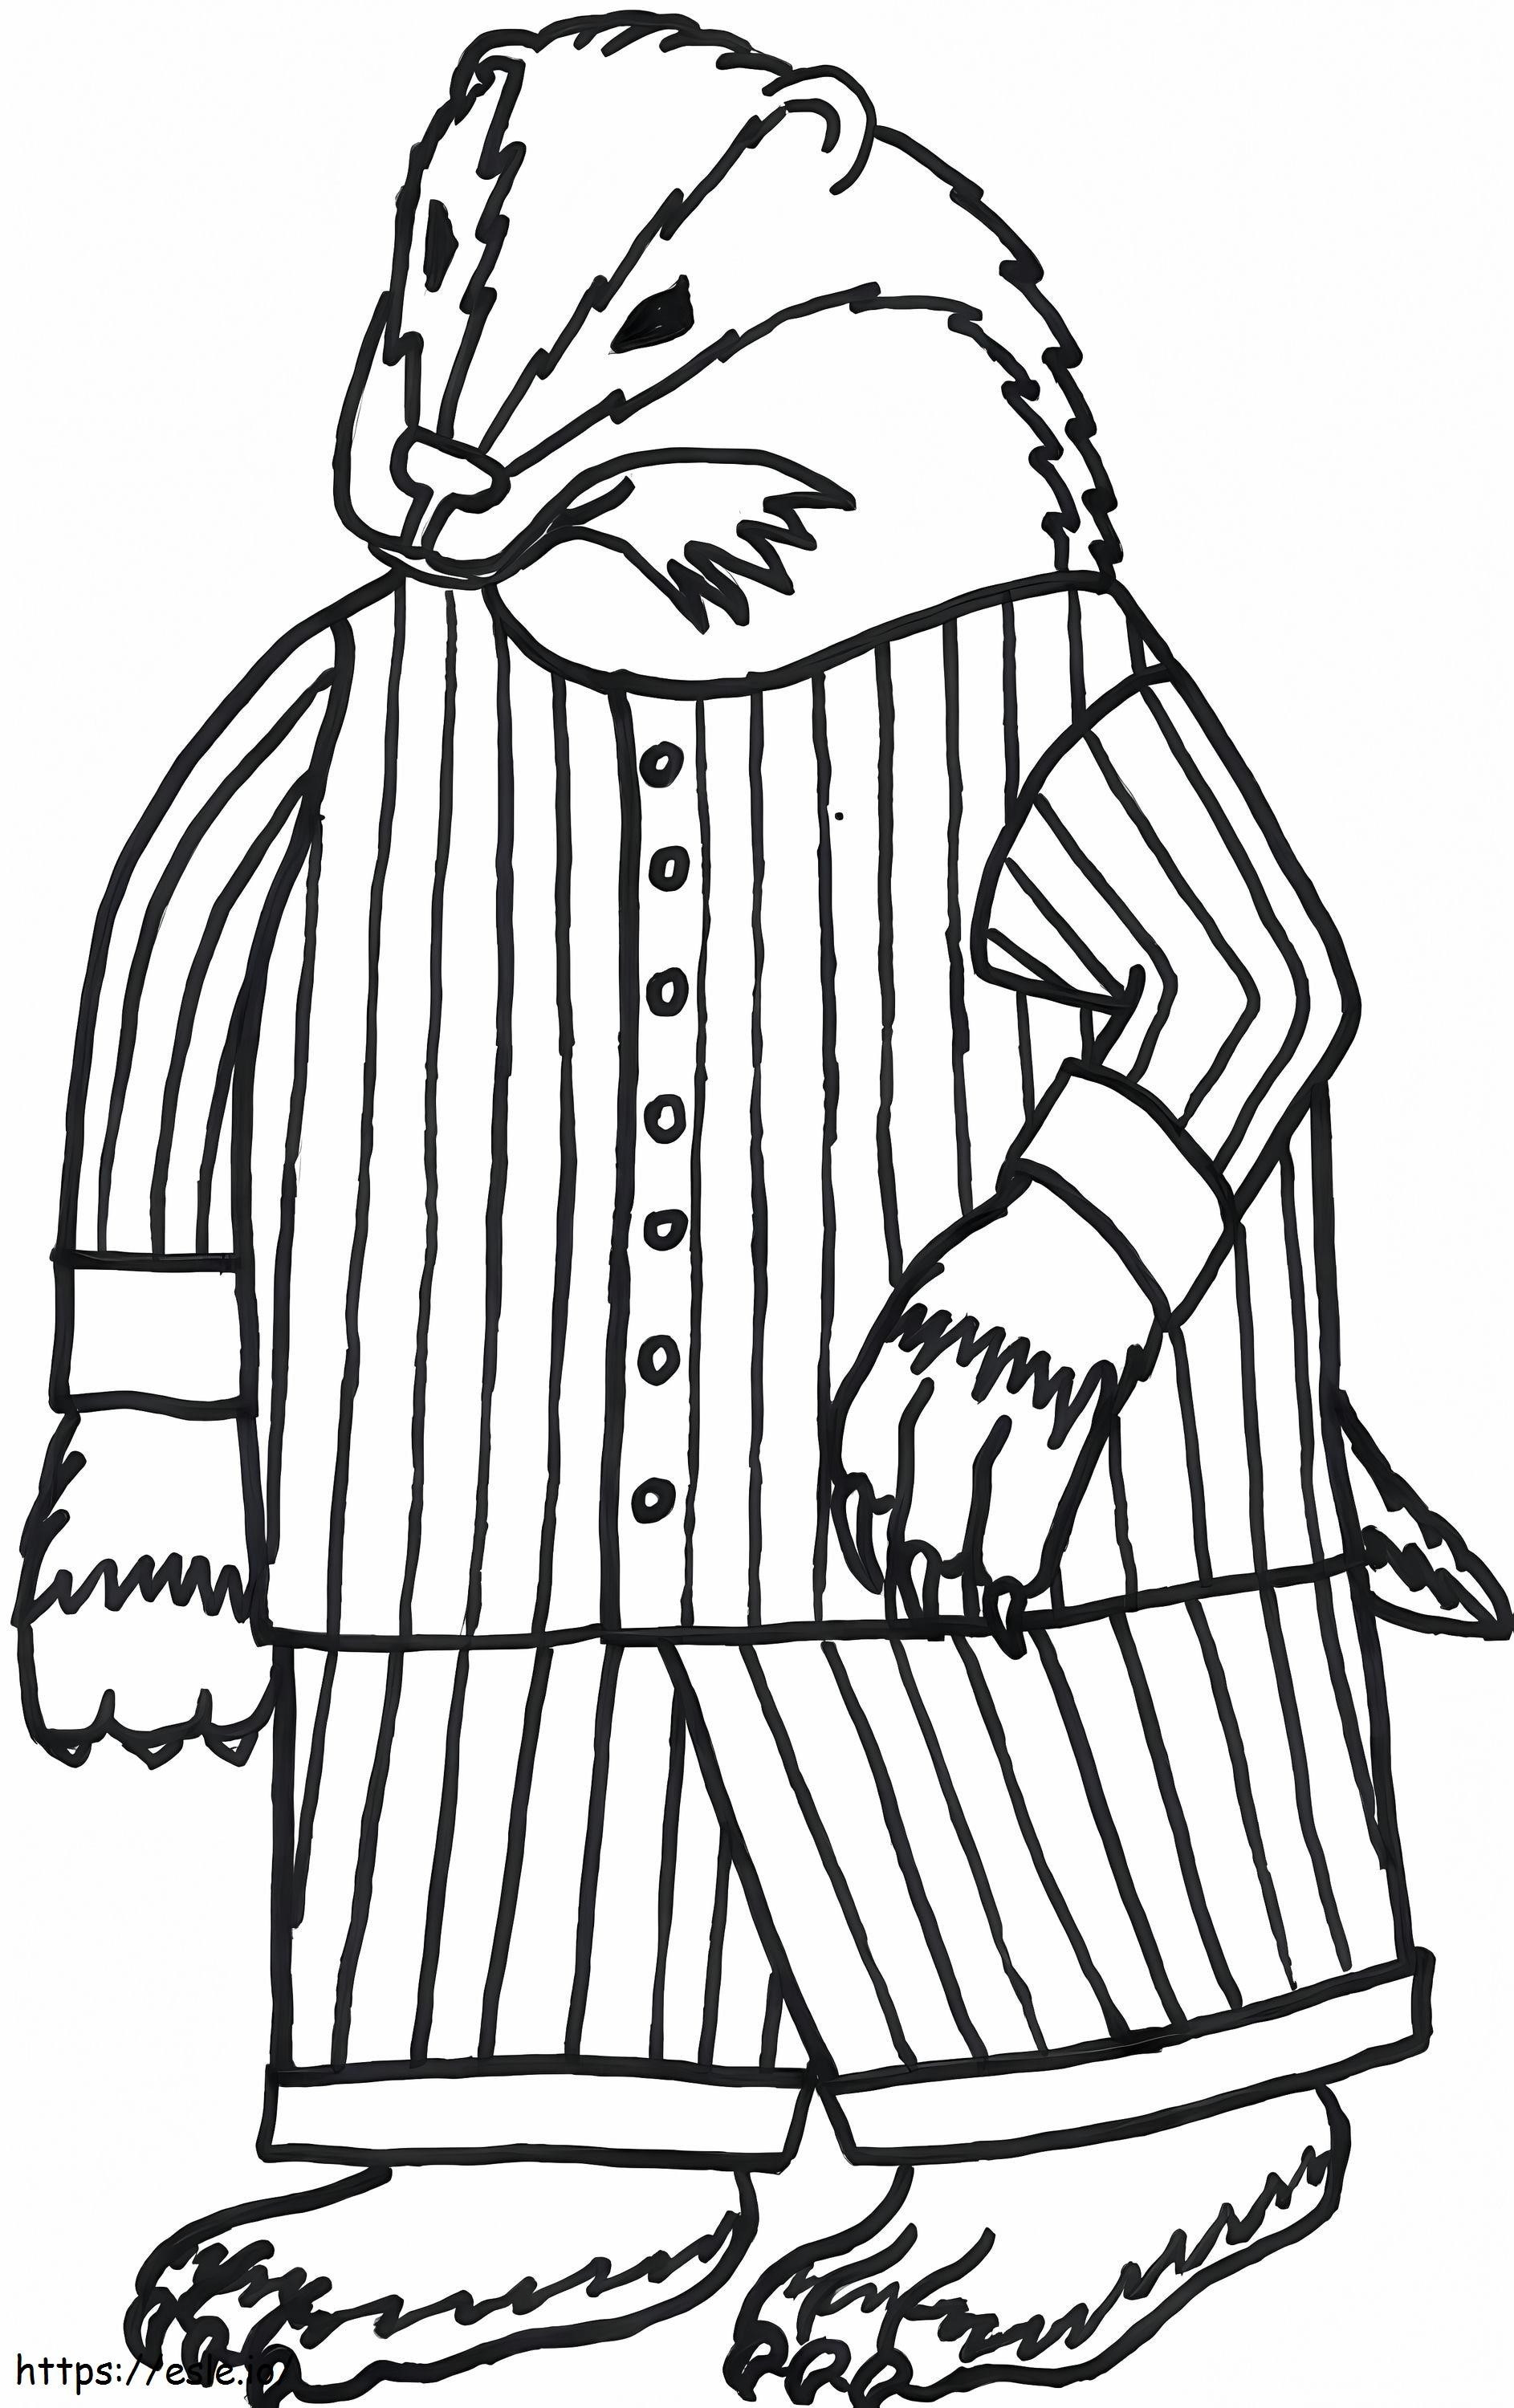 Badger With Pajamas coloring page